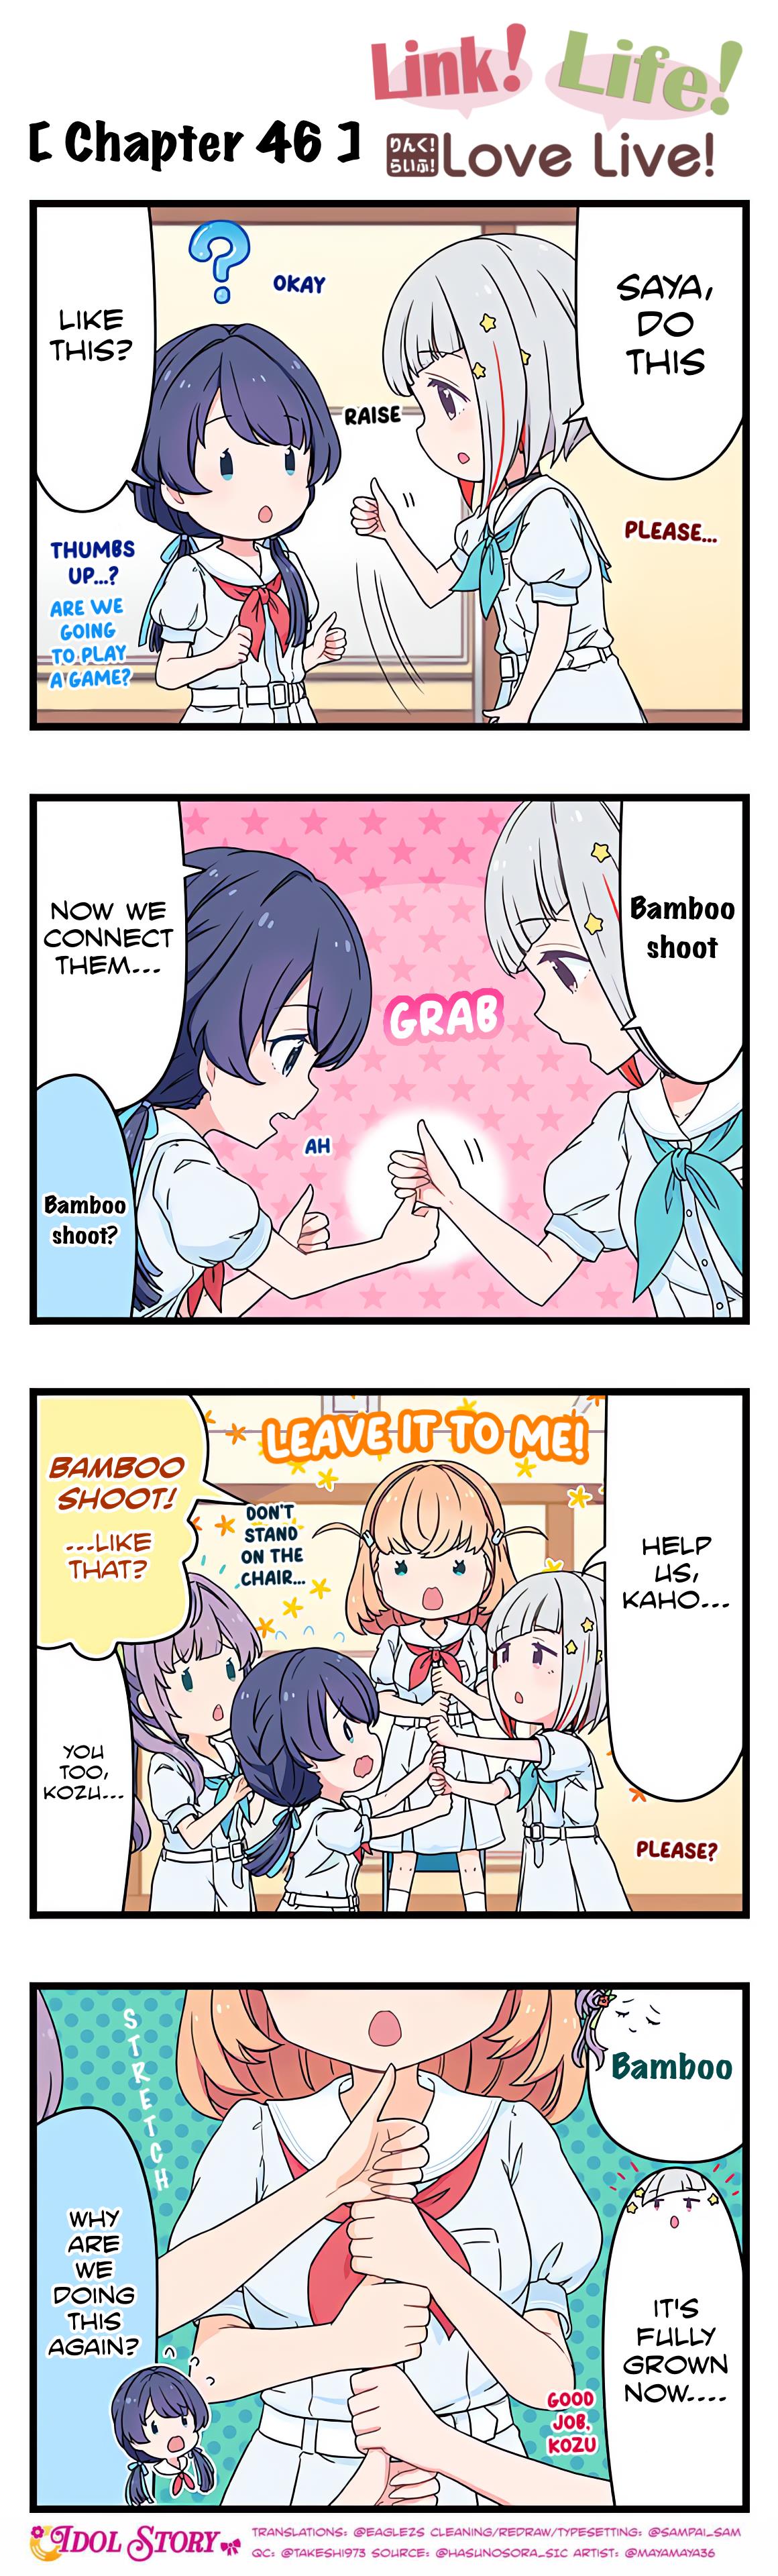 Link! Life! Love Live! - Page 1